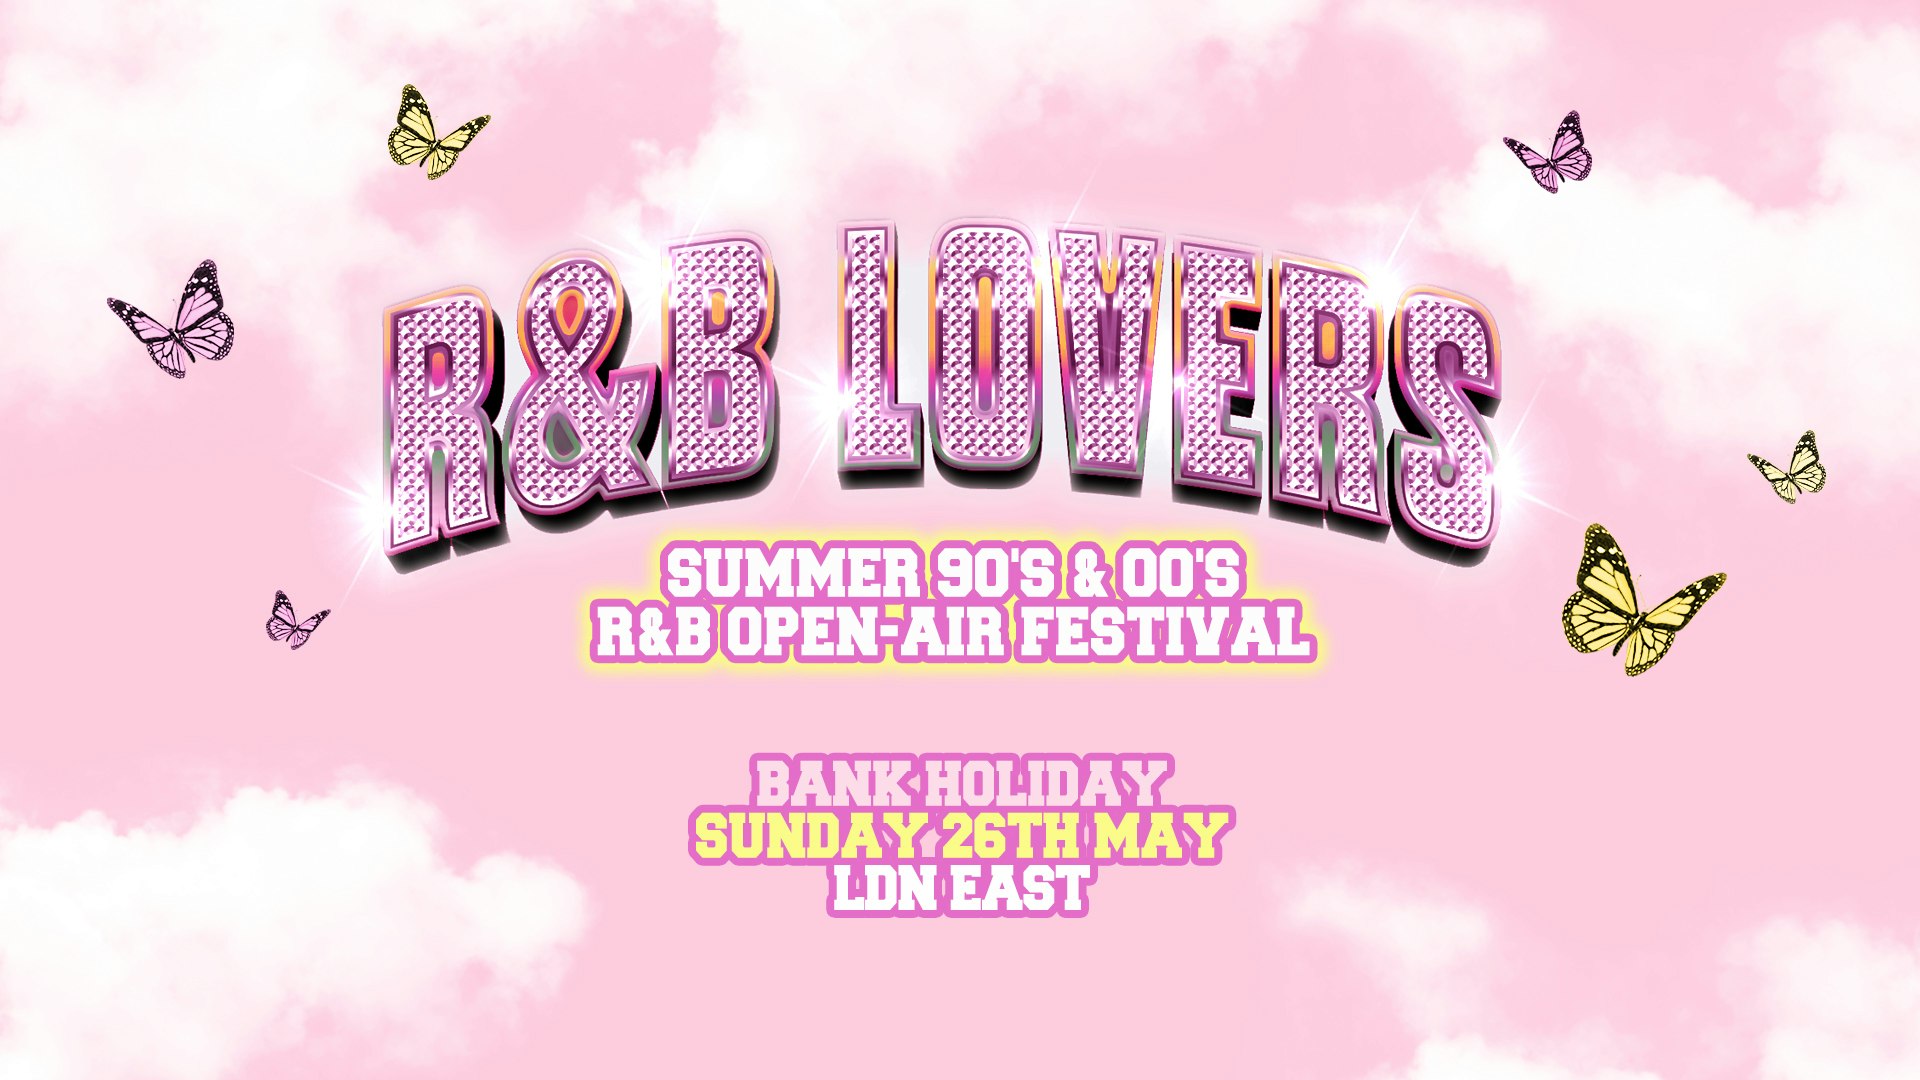 R&B Lovers Summer Open Air Festival – Sunday 26th May – LDN East [TICKETS SELLING FAST!]